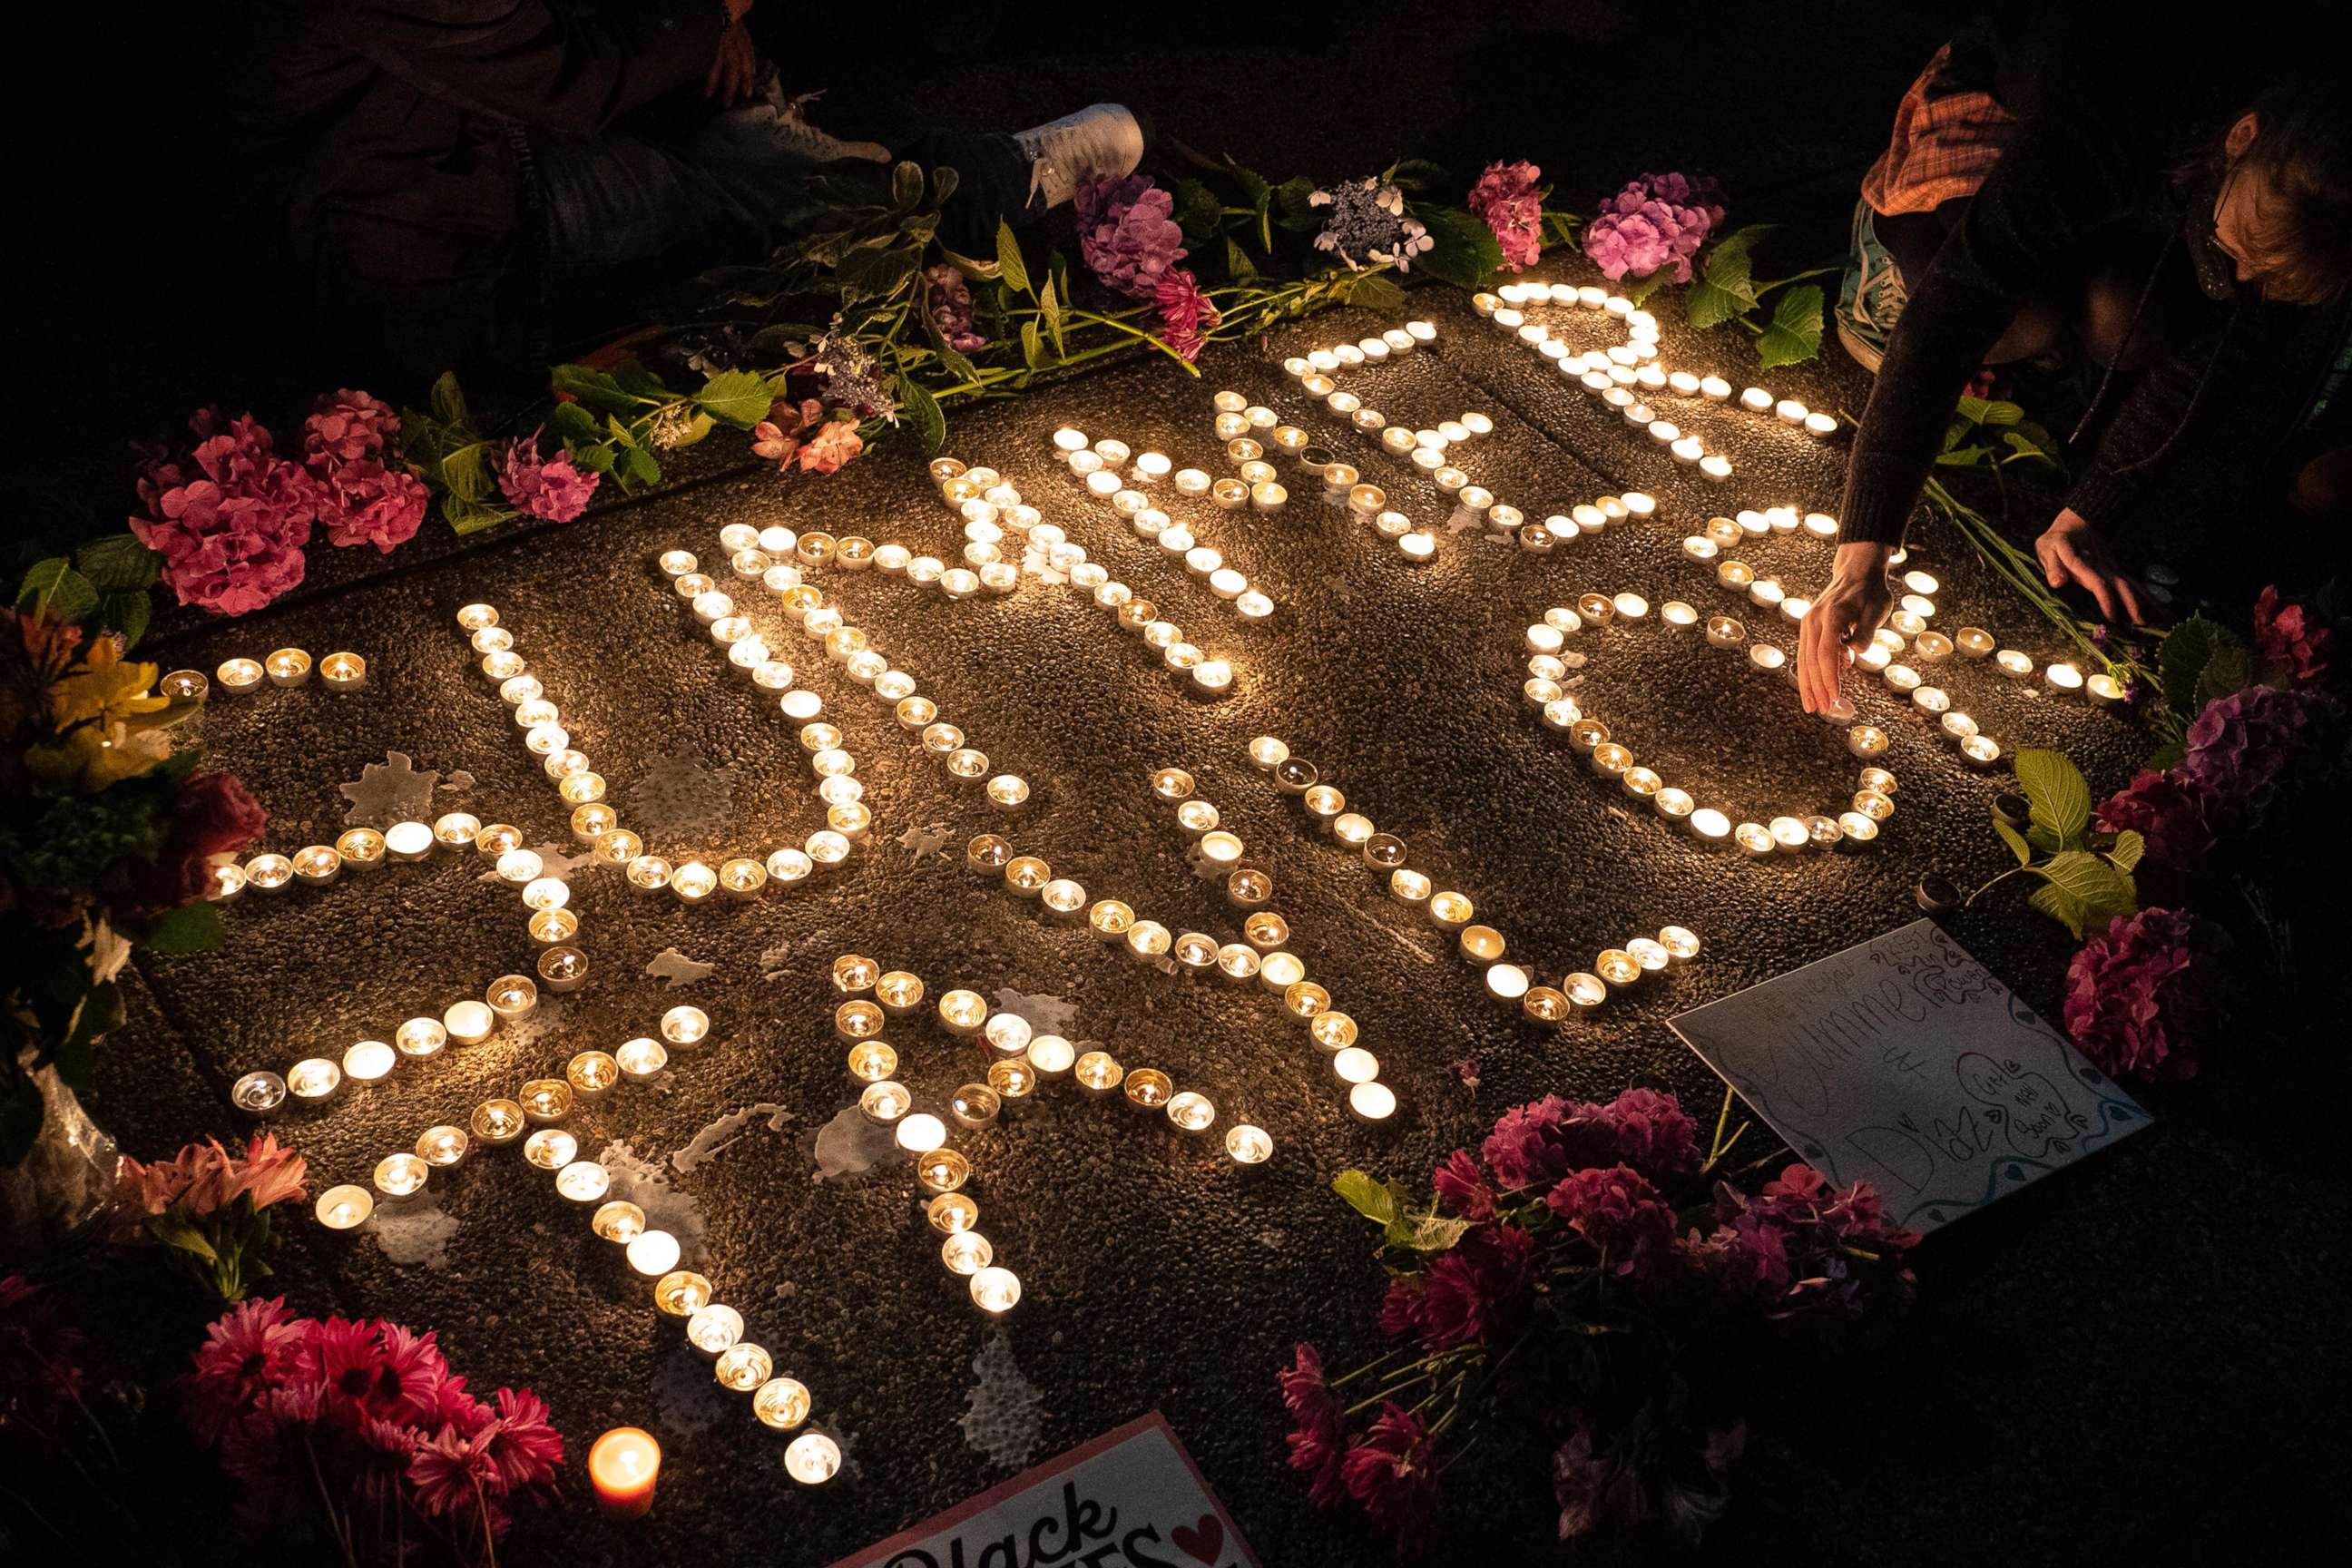 PHOTO: Protesters hold a vigil to honor Summer Taylor, who died after being hit by a car during a recent protest, on July 5, 2020 in Seattle.